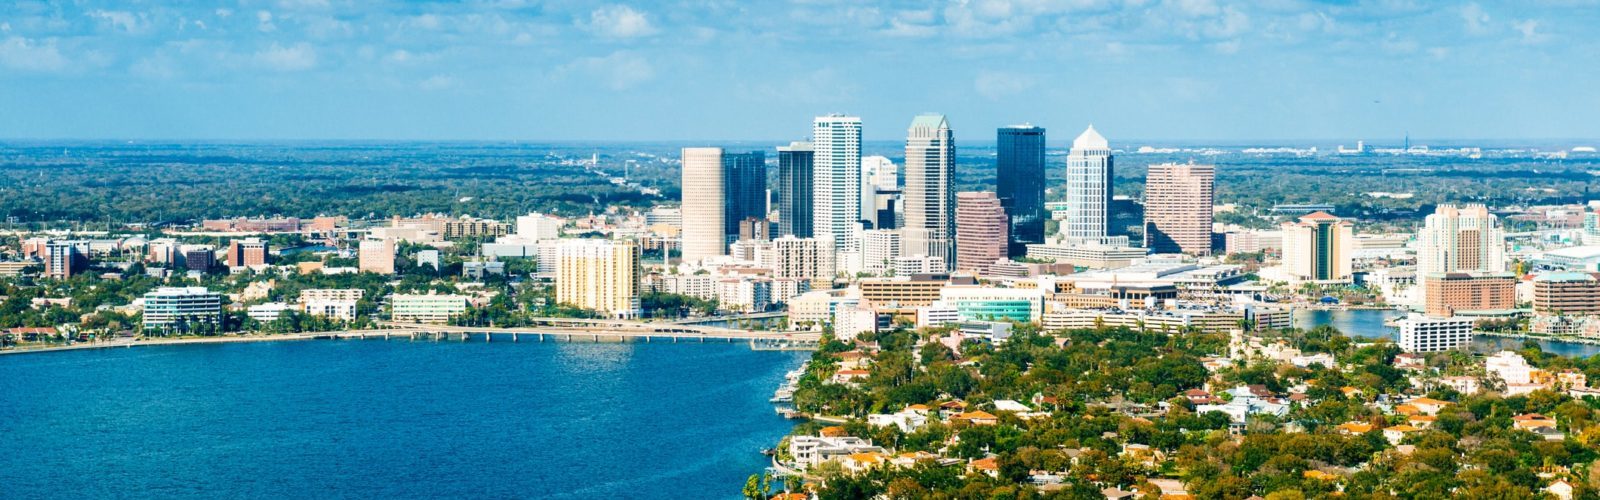 Skyline of Tampa, FL, where Lightning Bay Junk Removal offers junk removal services